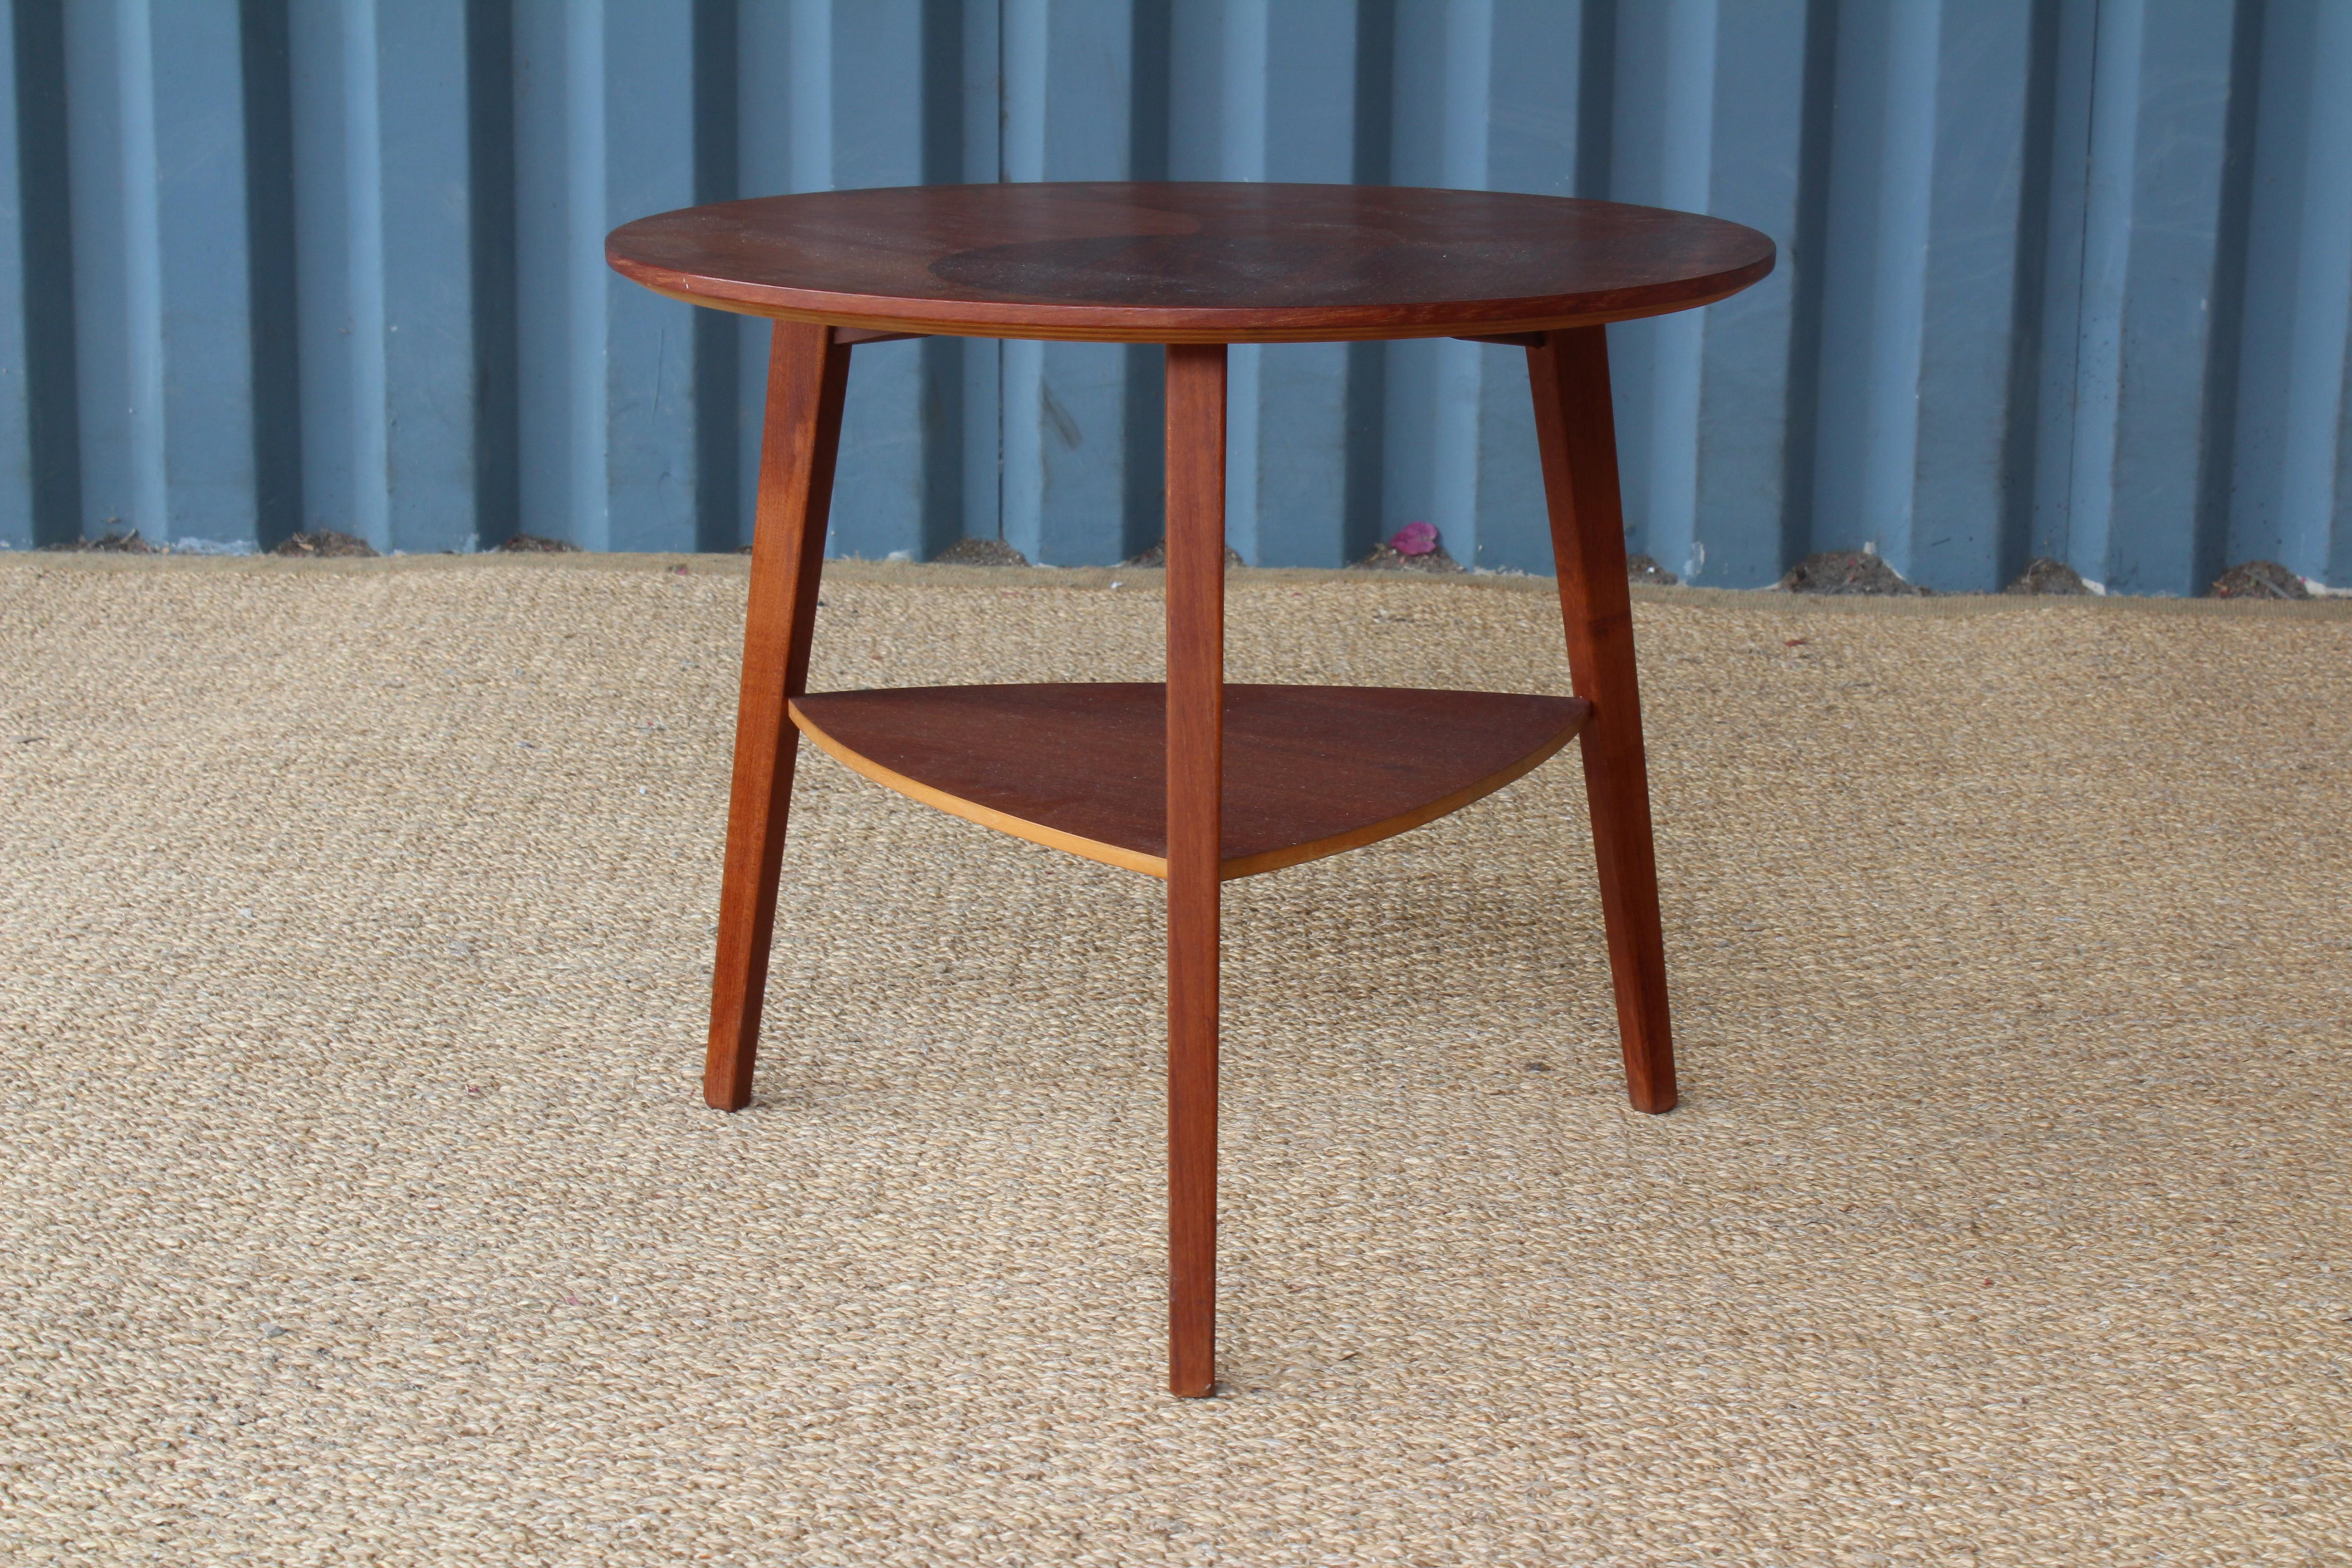 Teak end table with a pattern inlaid veneer surface, made in Denmark in the 1950s.